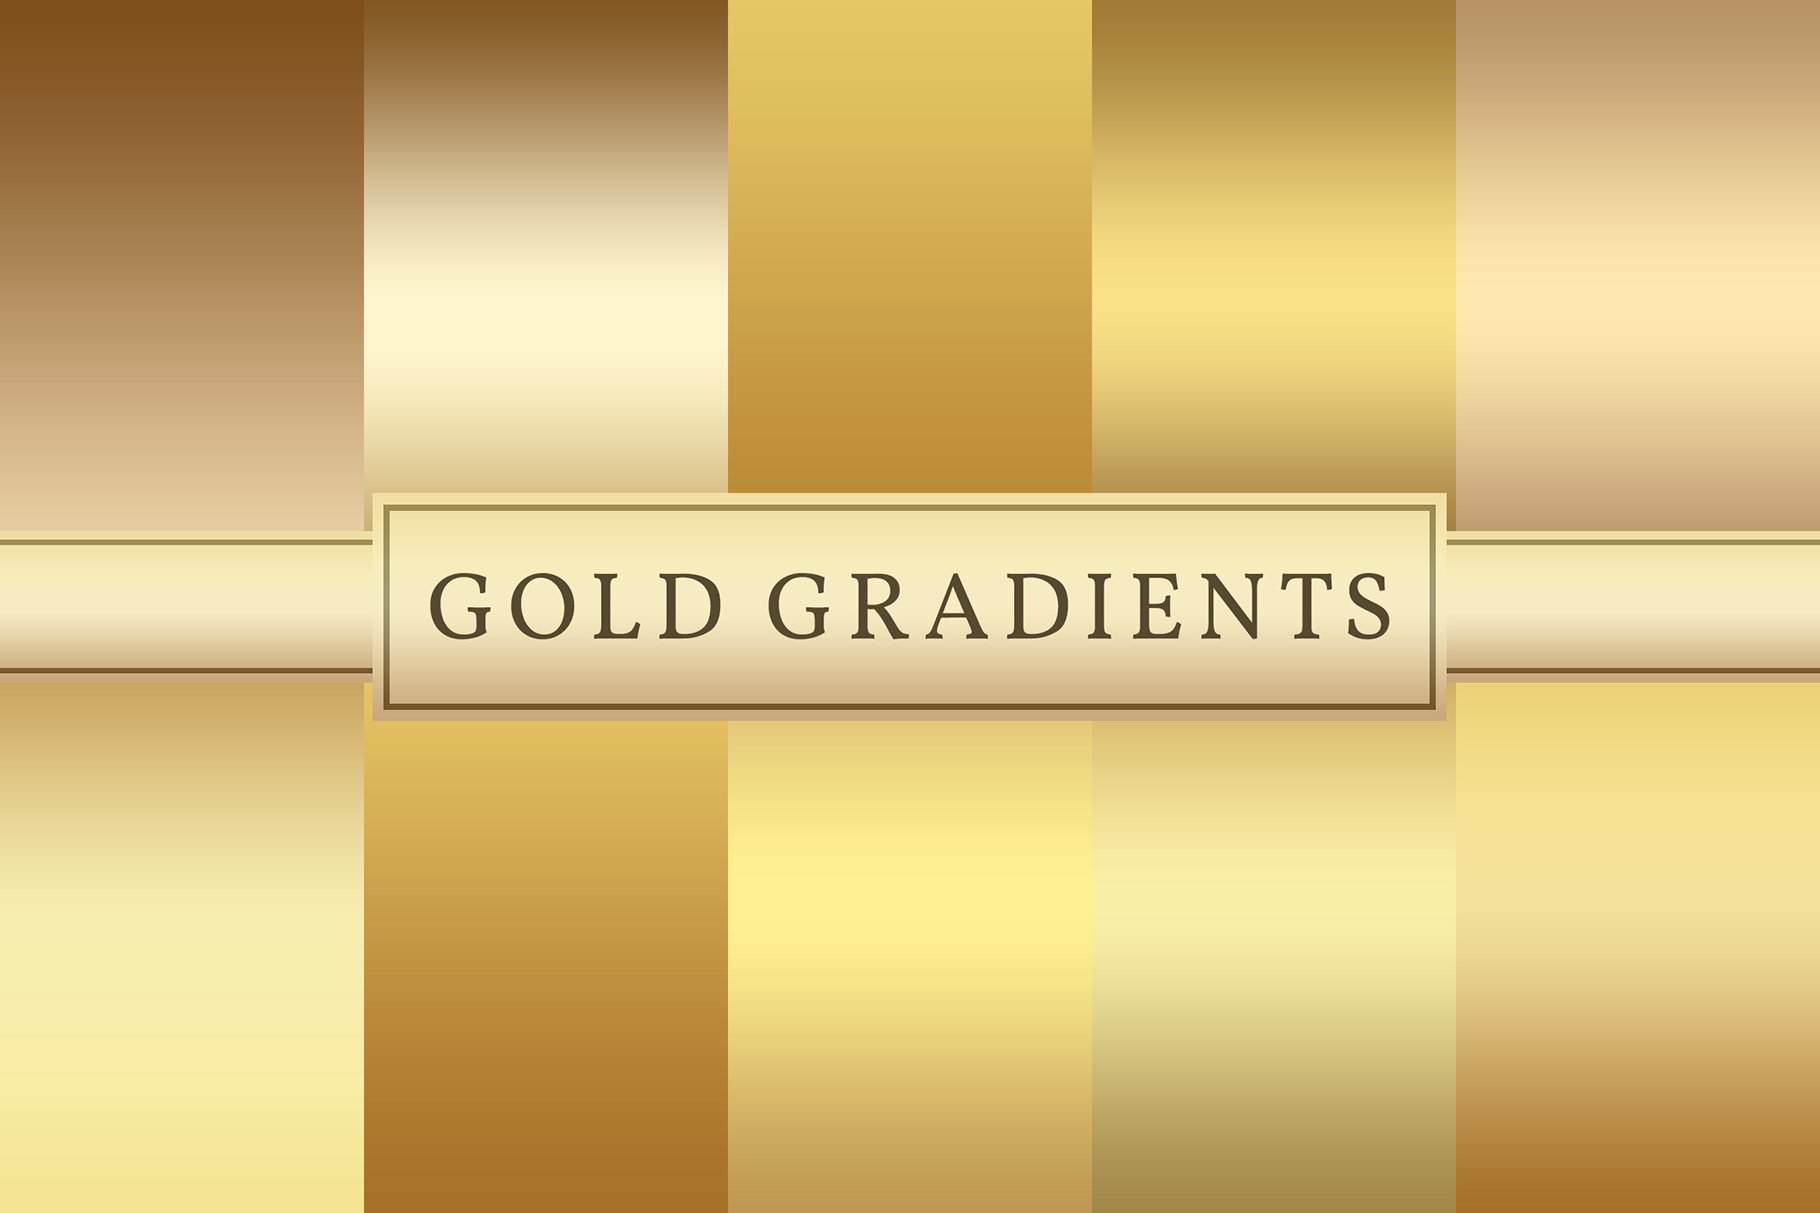 Gold Gradientscover image.